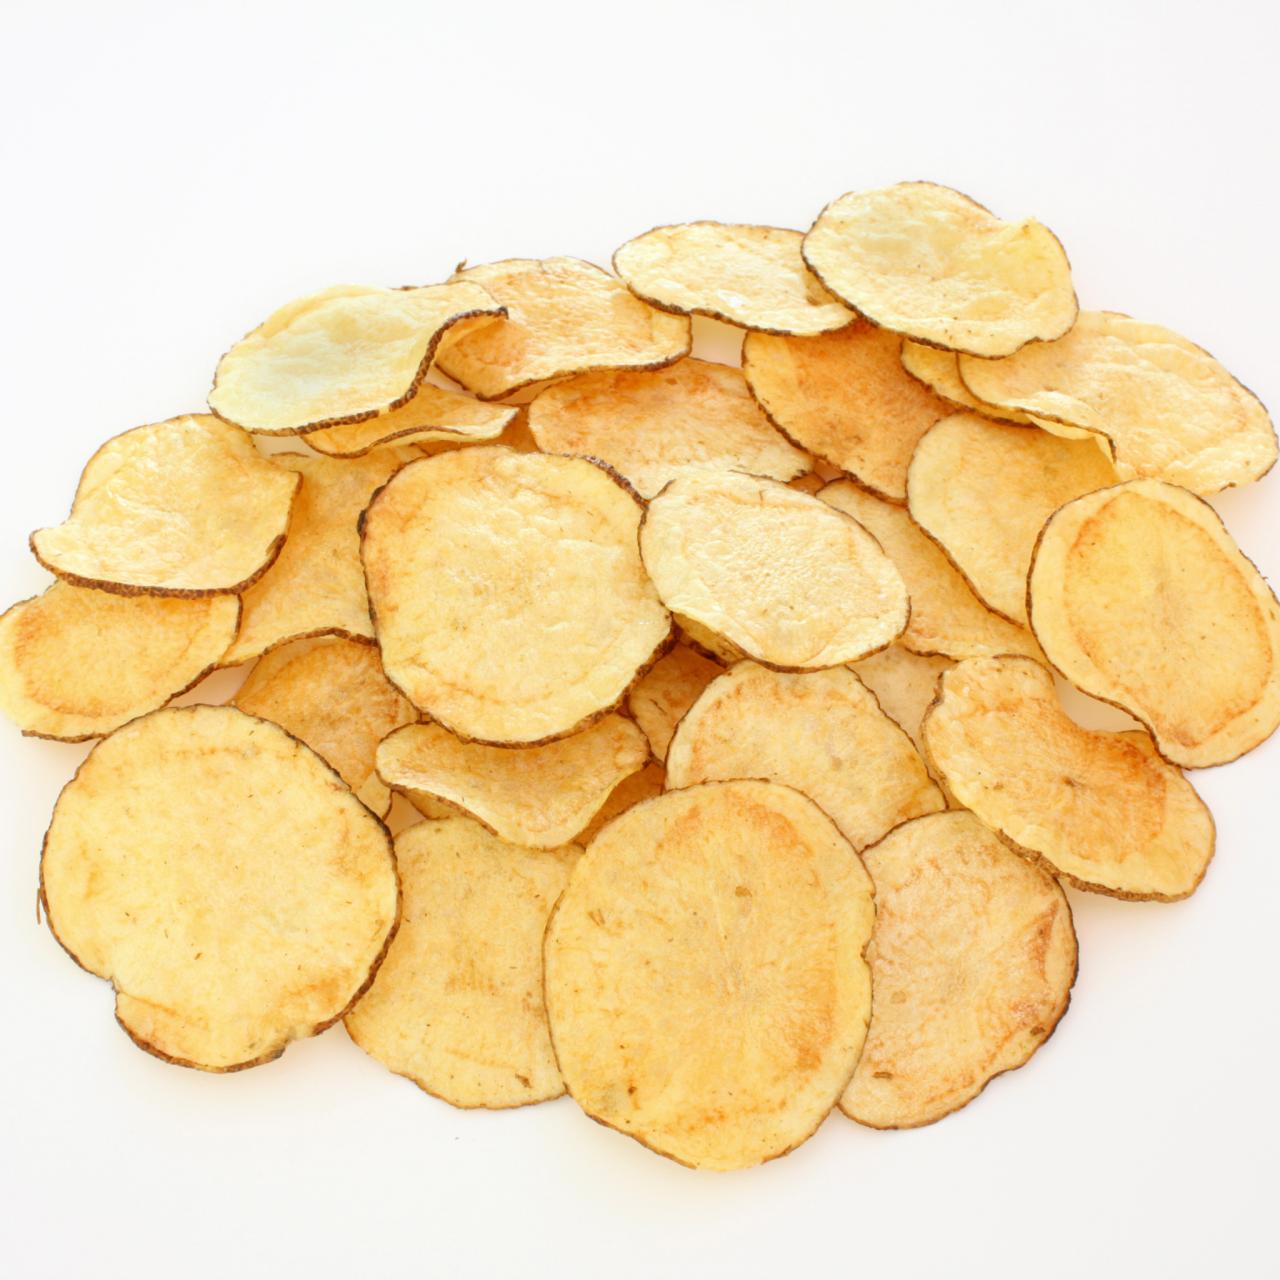 Are Potato Chips Bad For You? - Here Is Your Answer.